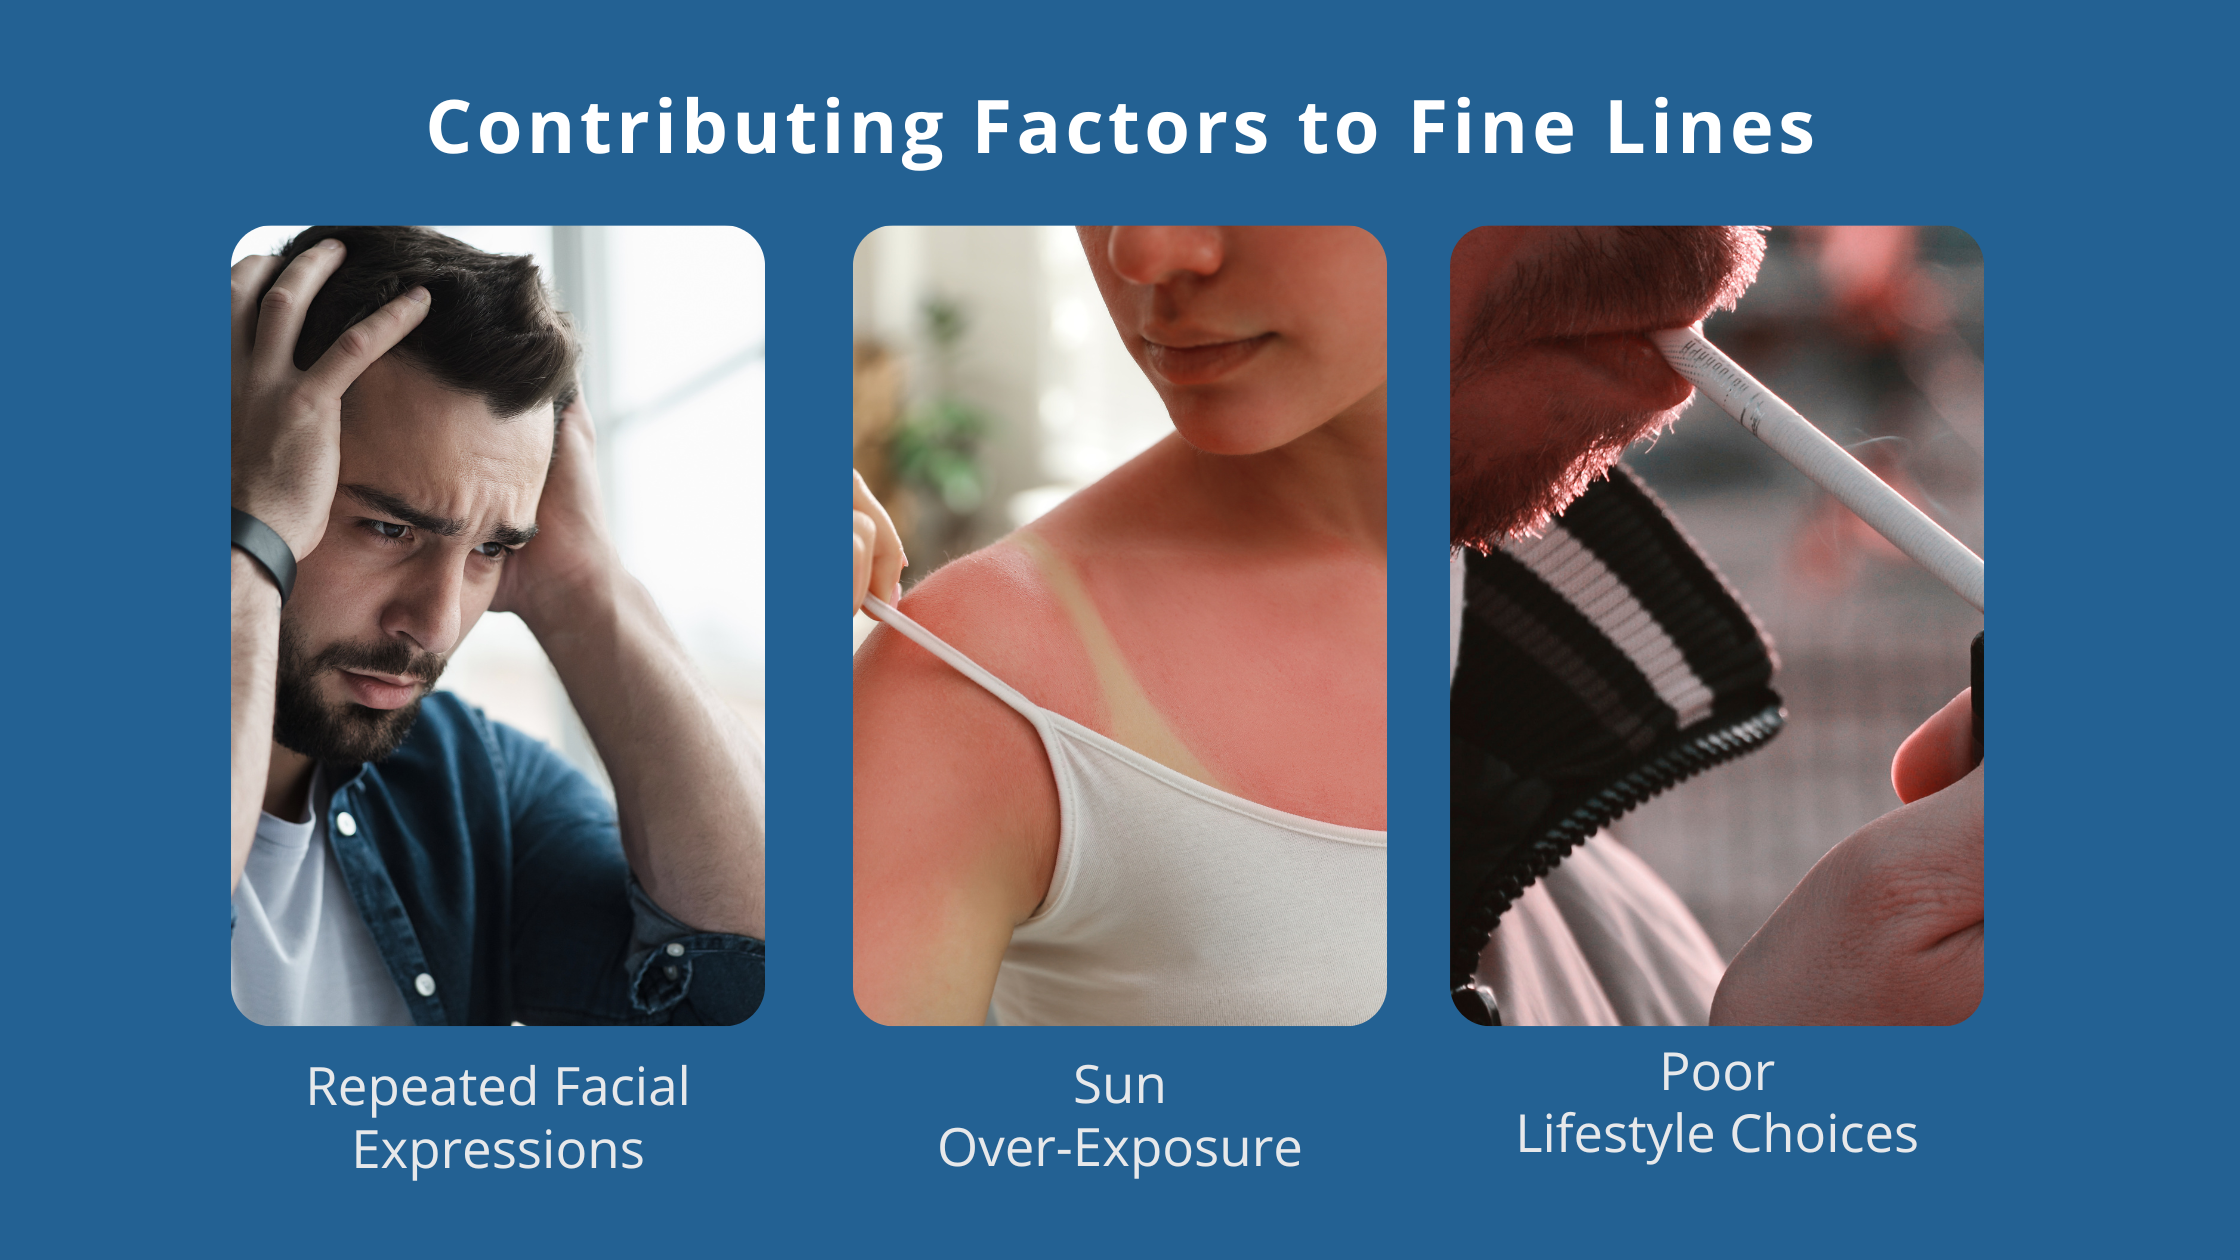 Contributing factors to frown lines